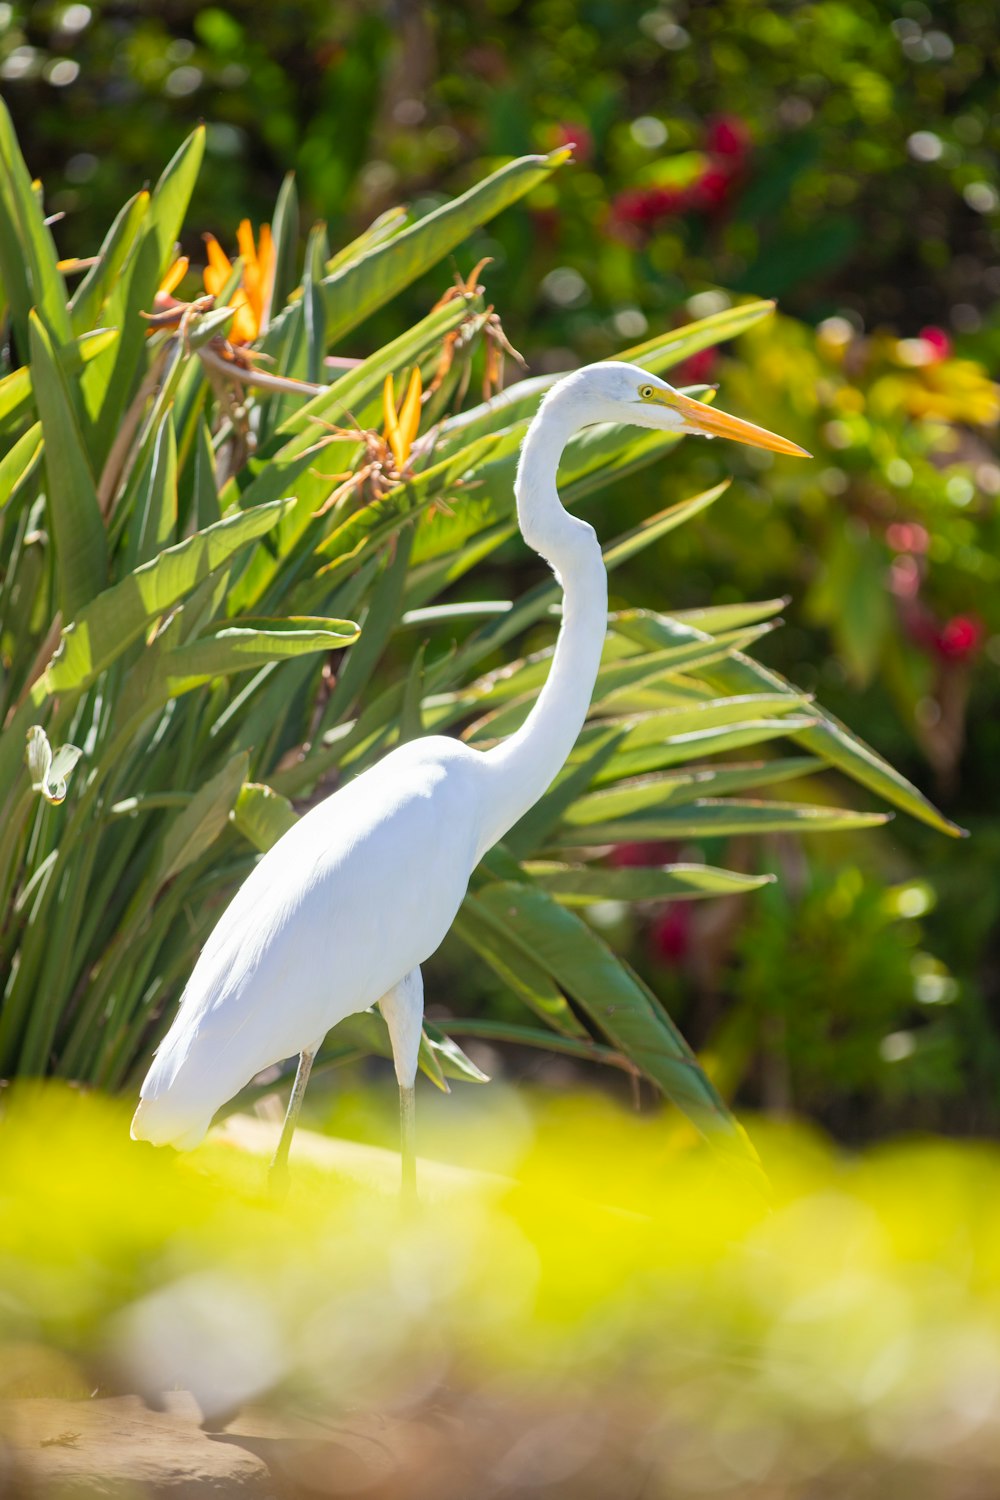 a large white bird standing next to a lush green plant